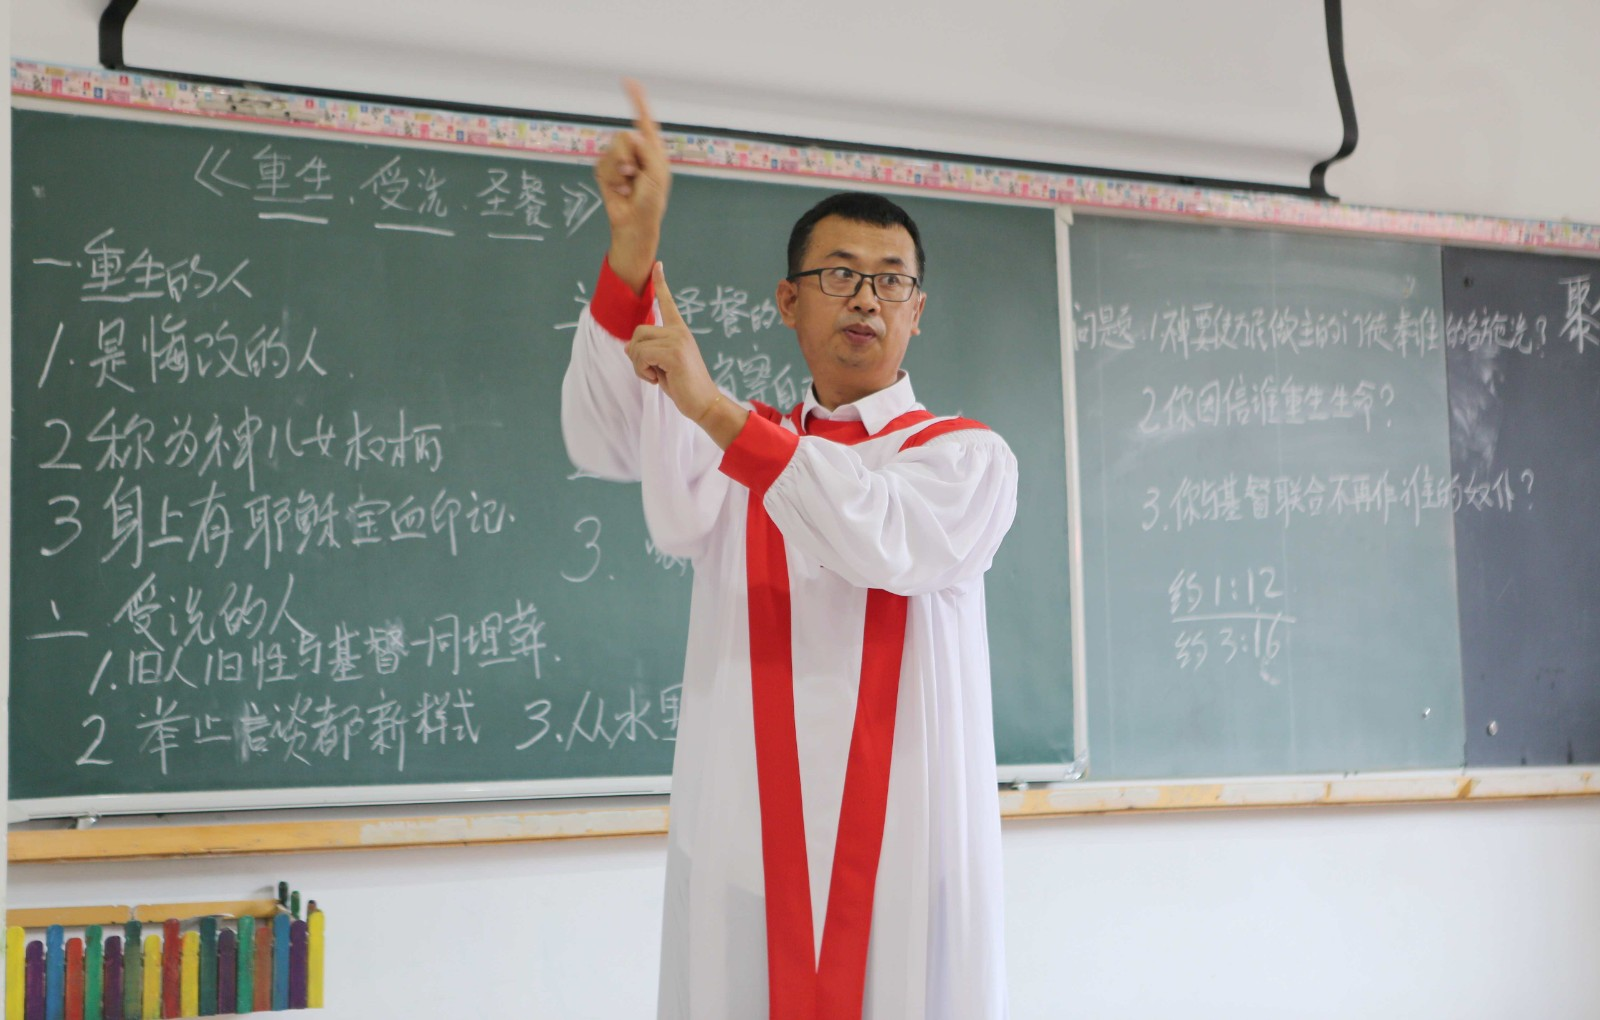 Wang Shengjun, in charge of Xinquan Deaf Fellowship of Xingsheng Church, Tiexi District, Anshan, Liaoning Province, preached a sermon in sign language on an unknown date in 2022. 